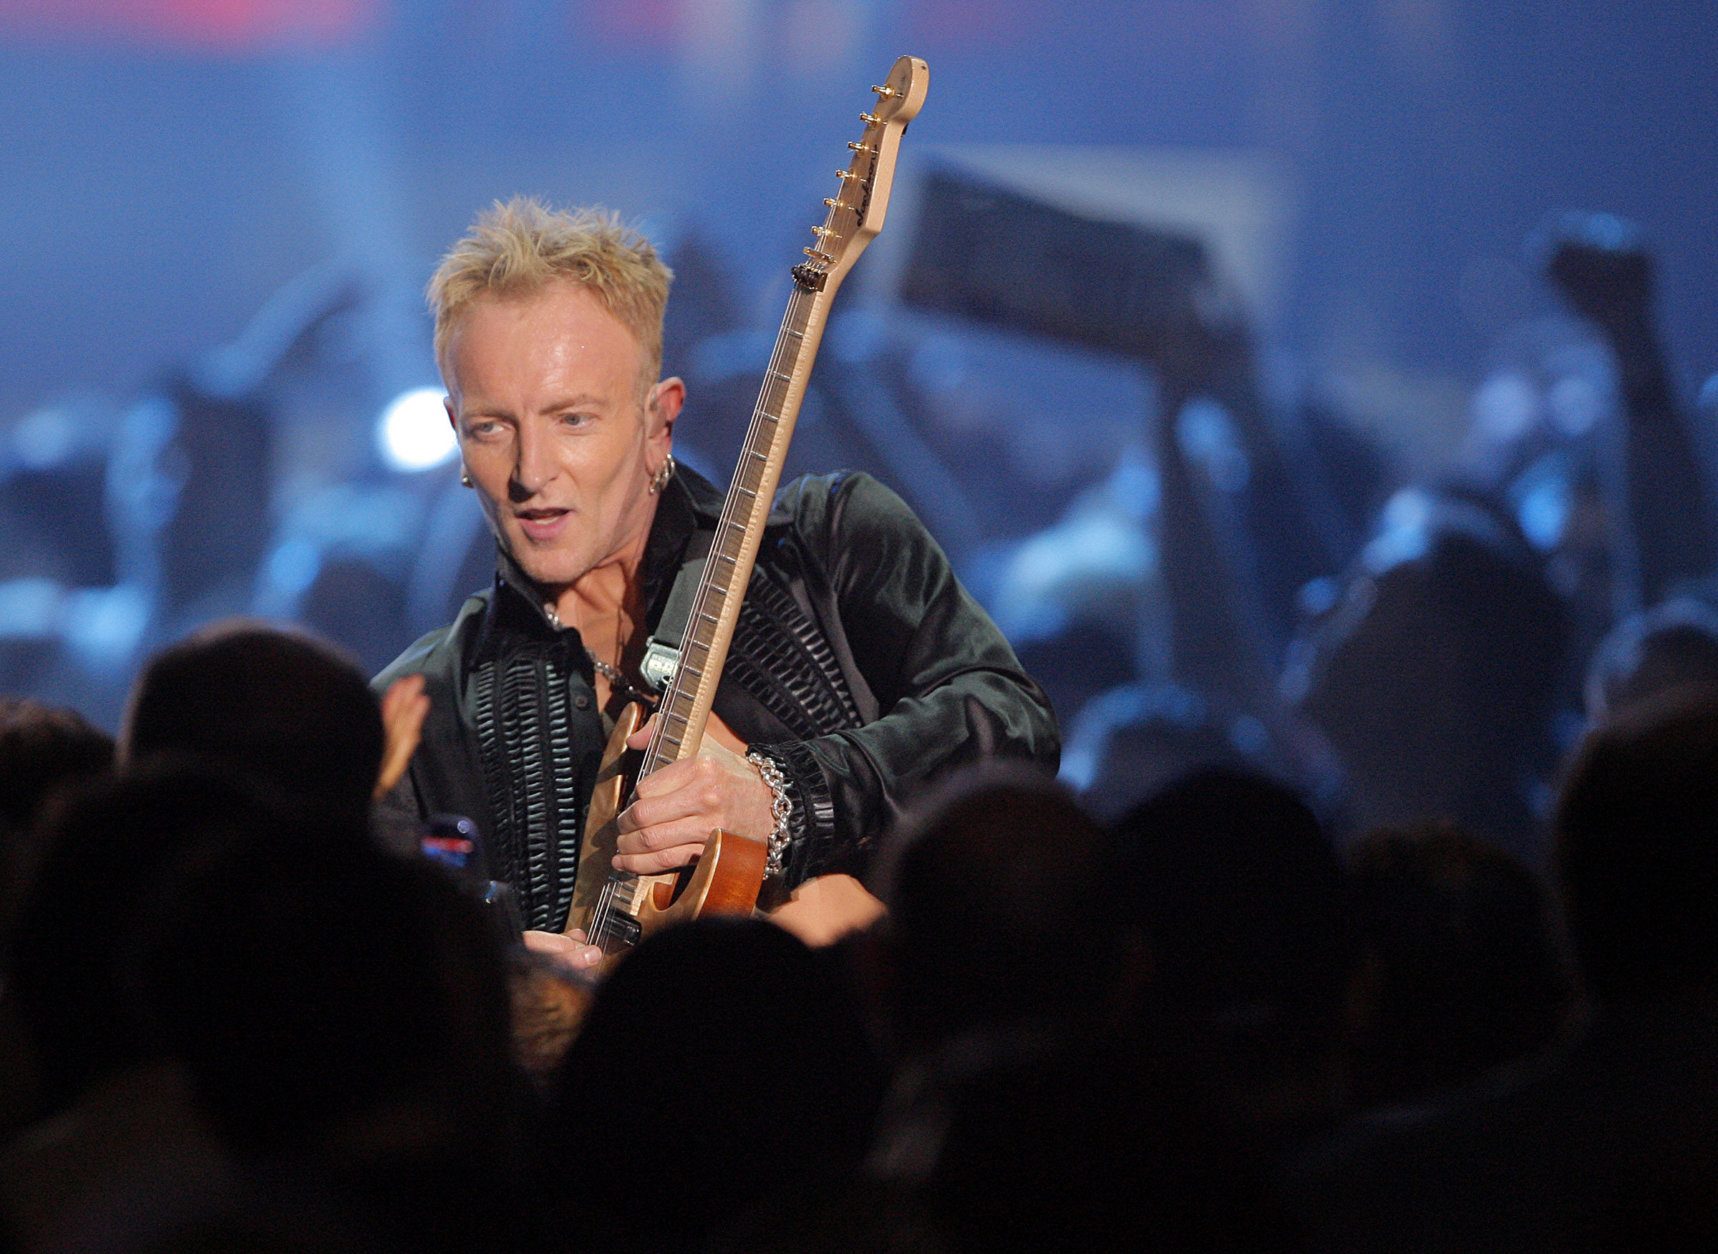 Phil Collen of rock group Def Leppard performs during the VH1 Rock Honors concert in Las Vegas on Thursday, May 25, 2006.   (AP Photo/Jae C. Hong)